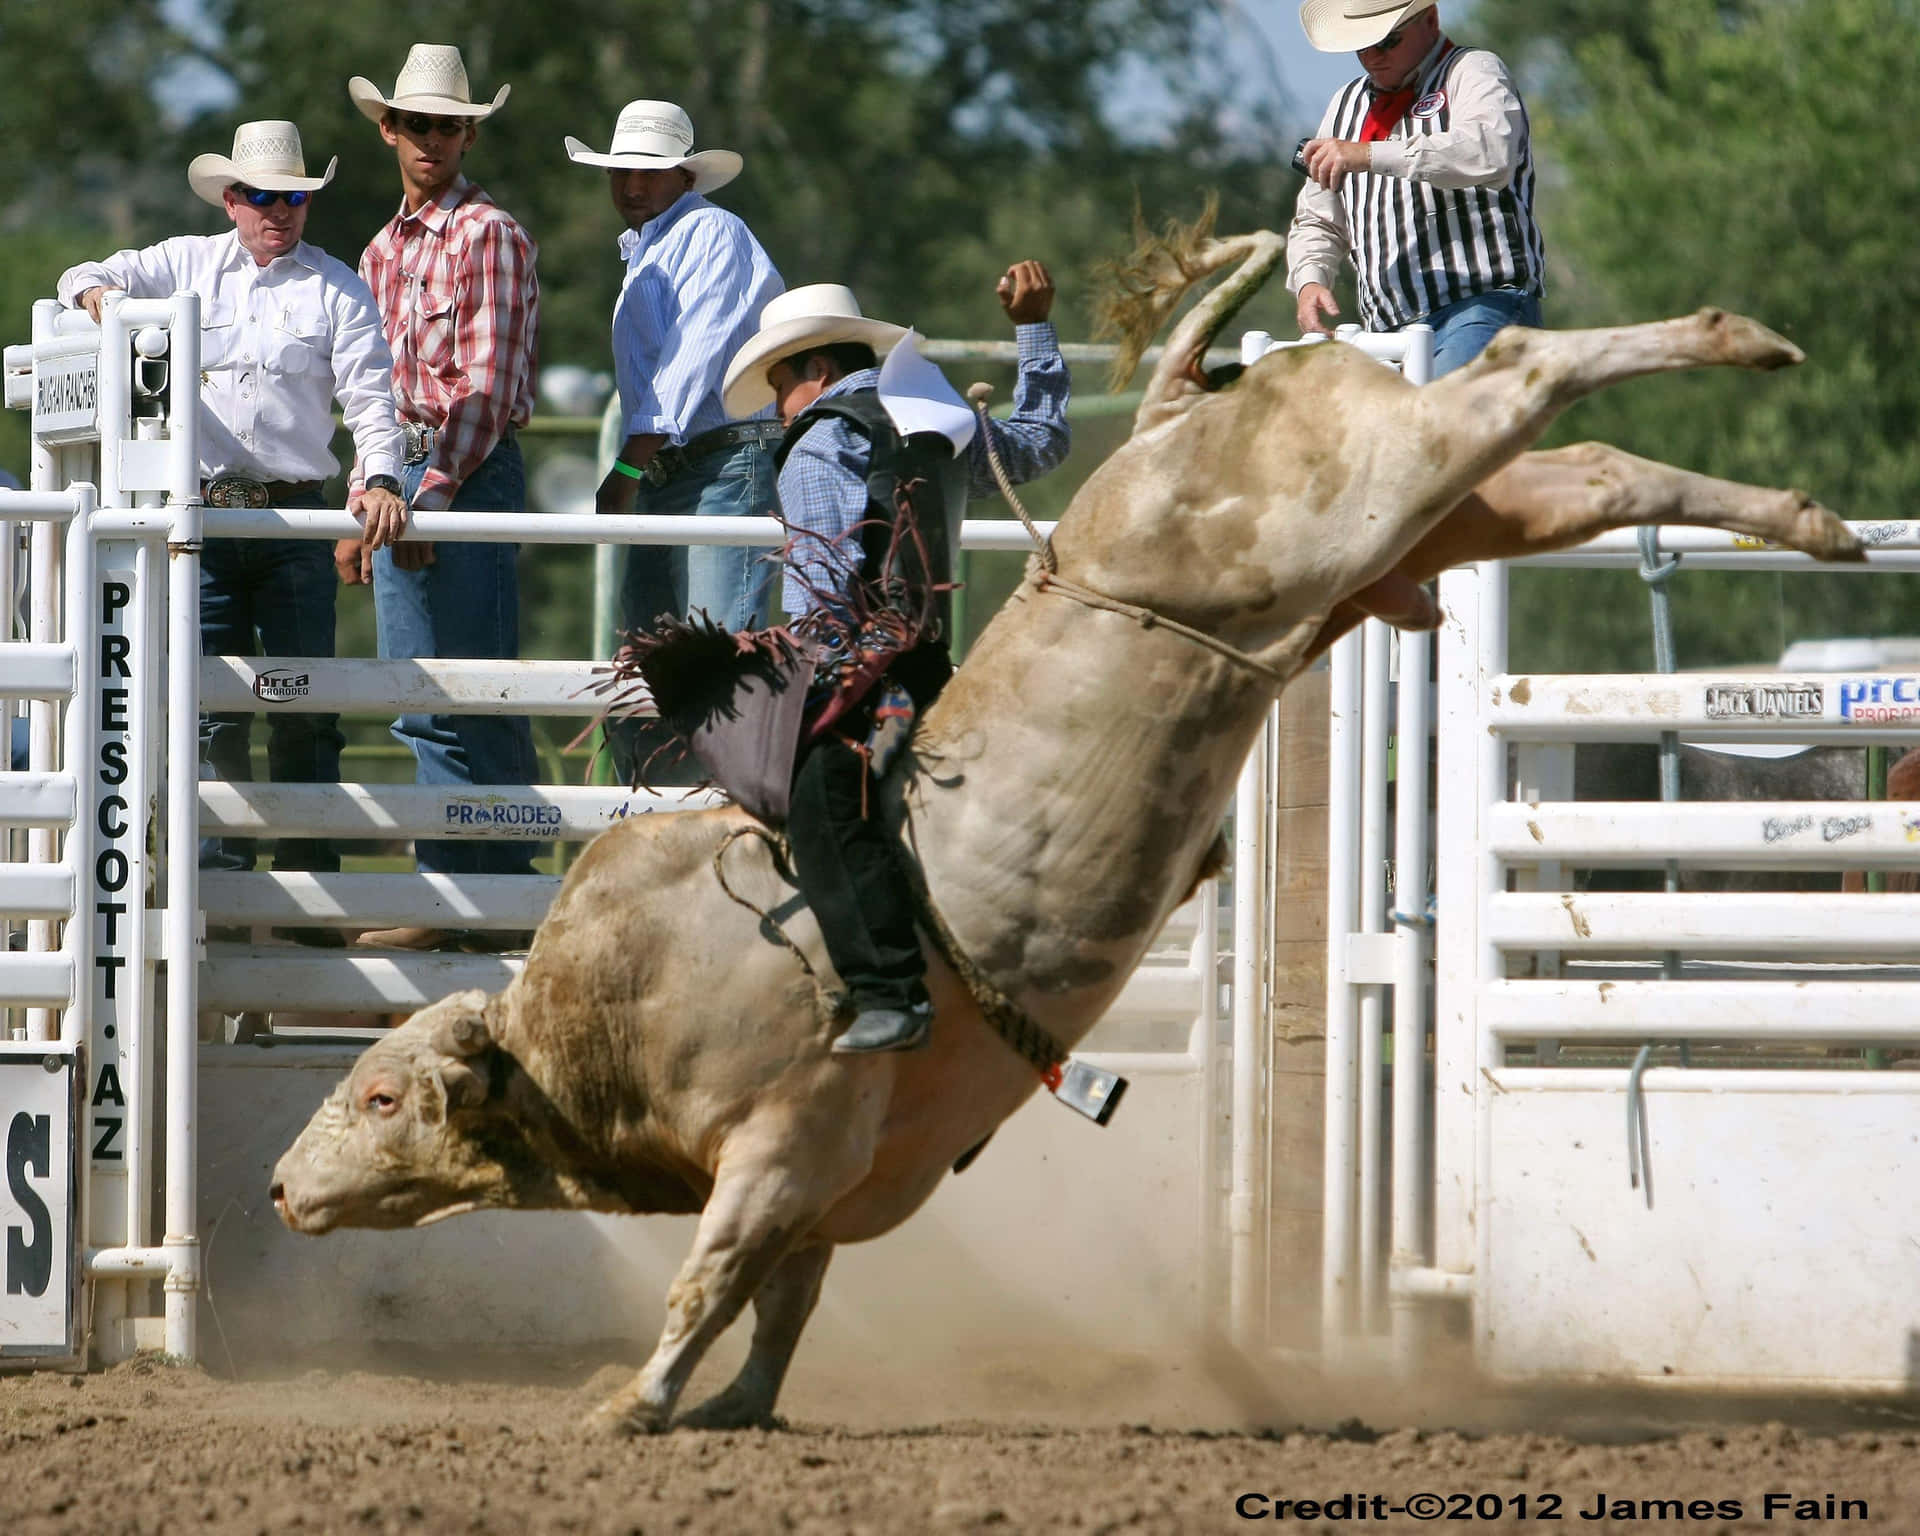 A professional bull rider in the middle of a thrilling eight-second ride.